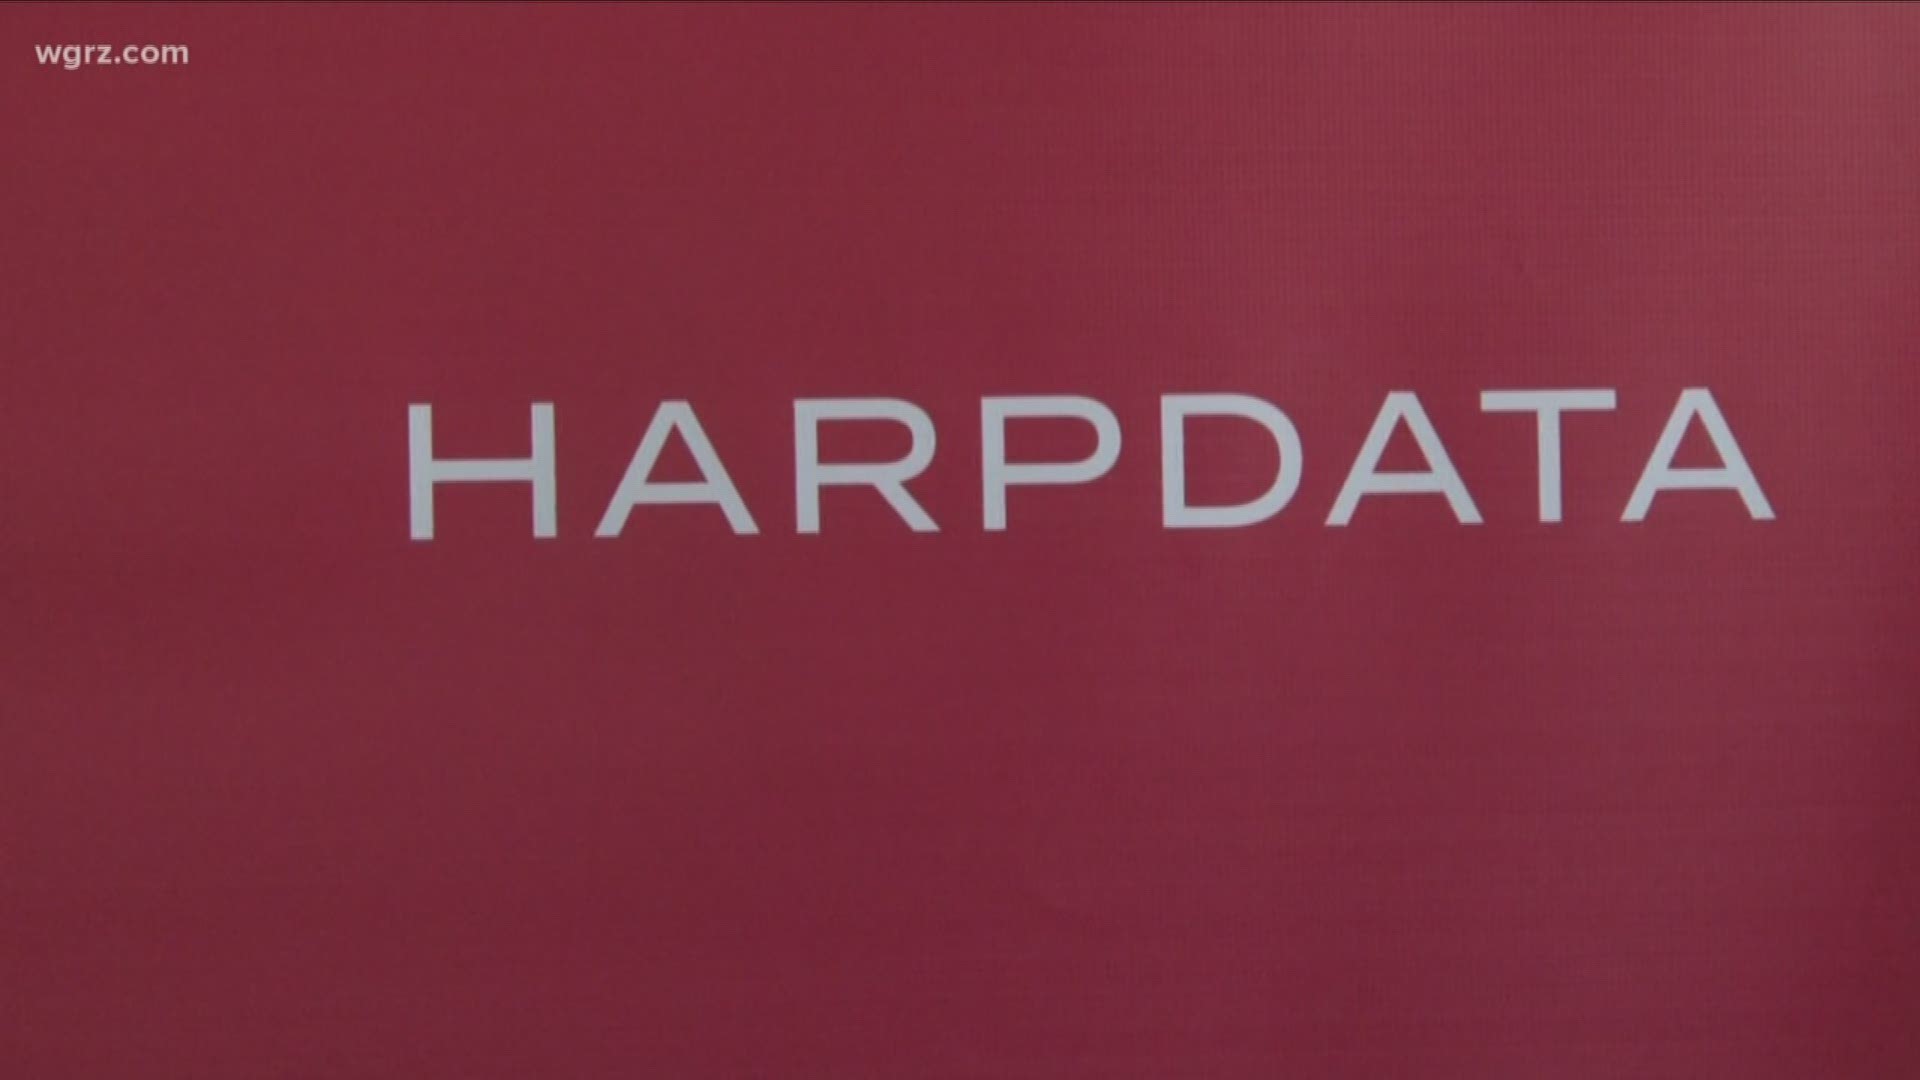 Harp-Data is a small firm that that advises companies on how to better reinforce their data systems.